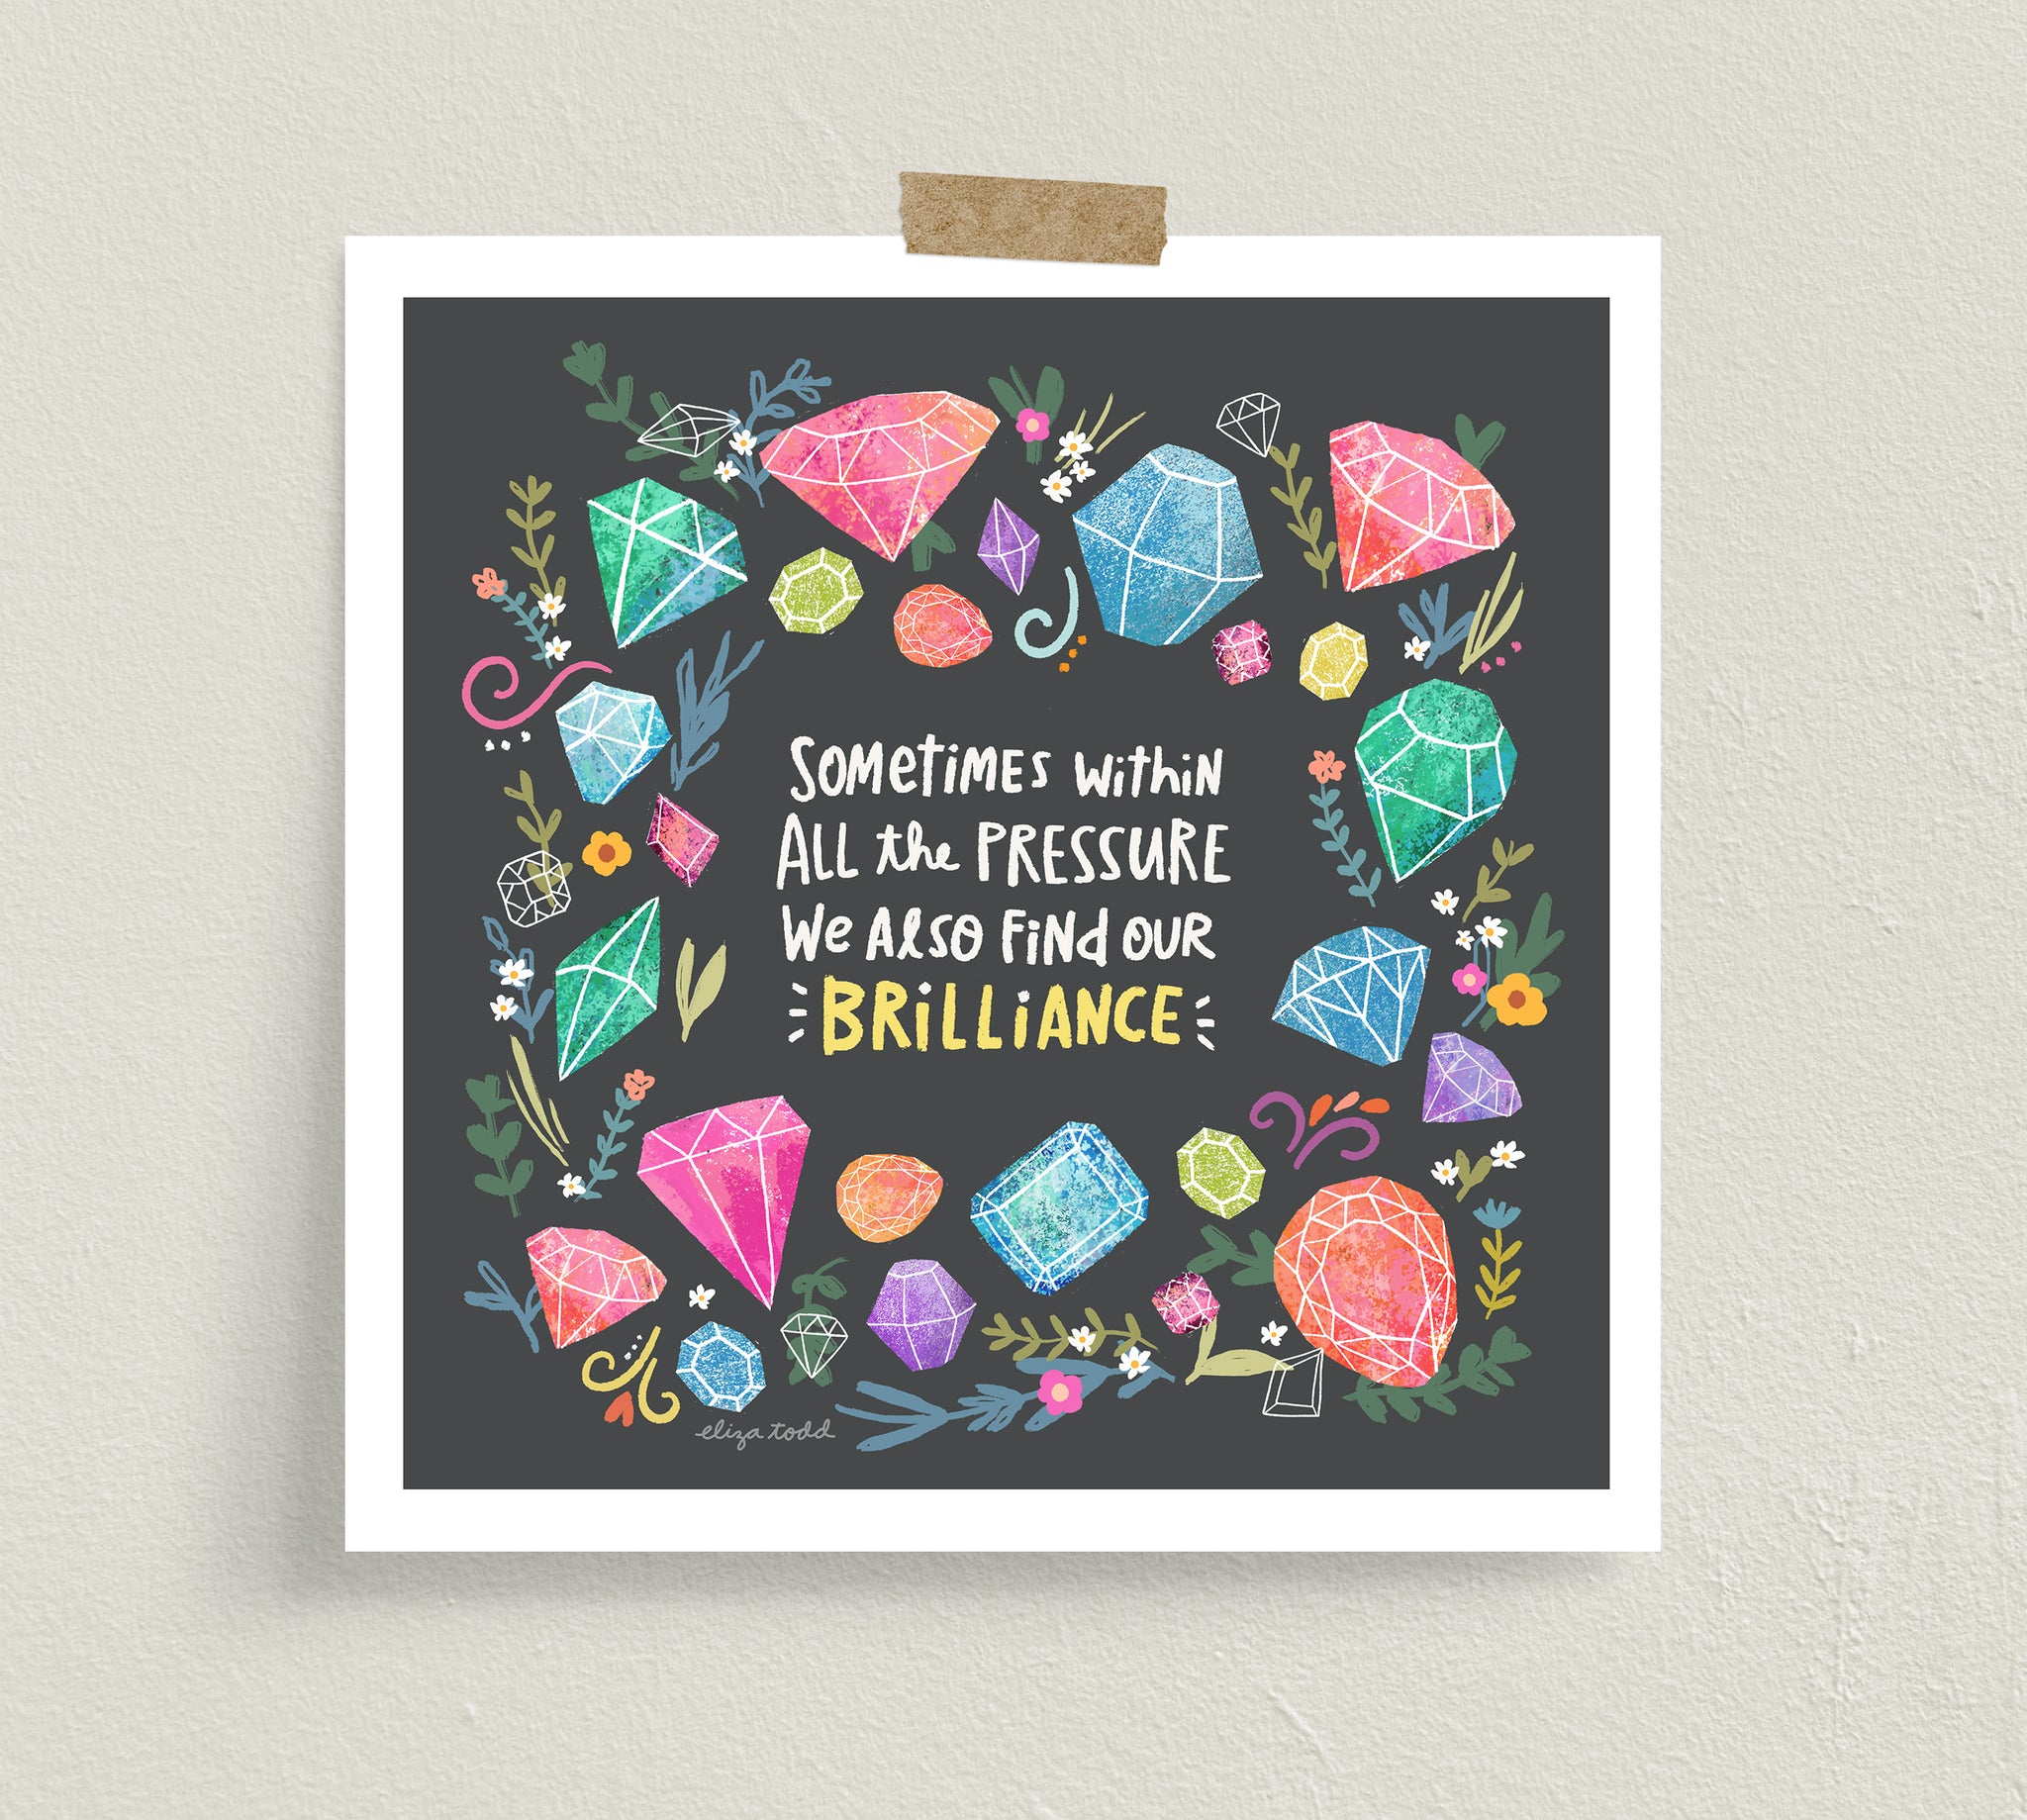 Fine art prints by Eliza Todd featuring bright gems and saying "Sometimes within all the pressure we also find our brilliance." - APeaceofWerk.com